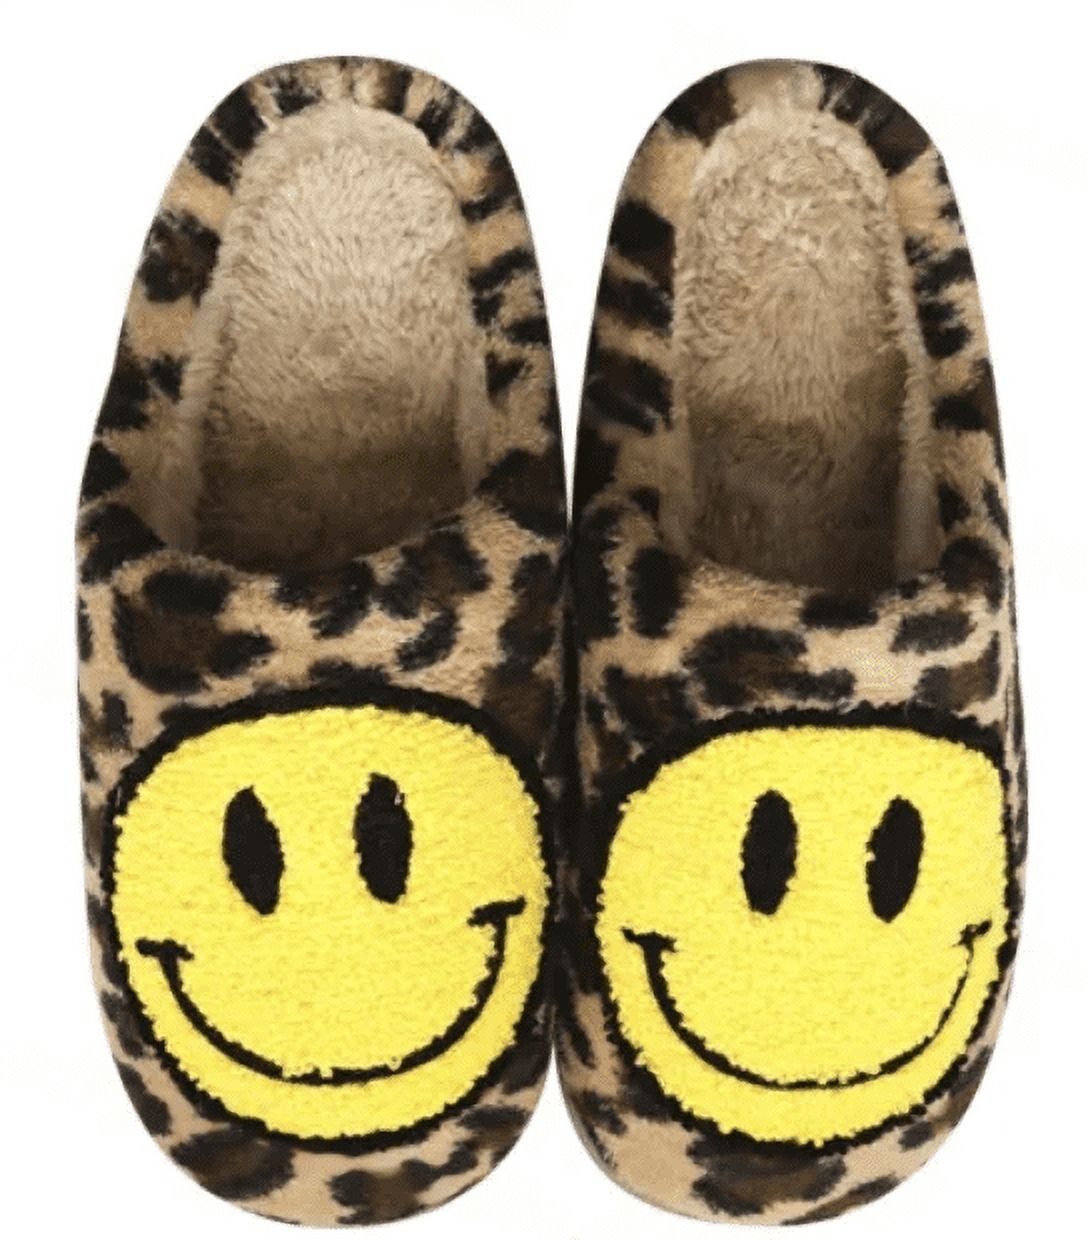 Lively Footwear Embrace Playfulness with Hot Pink Smiley Face Slippers